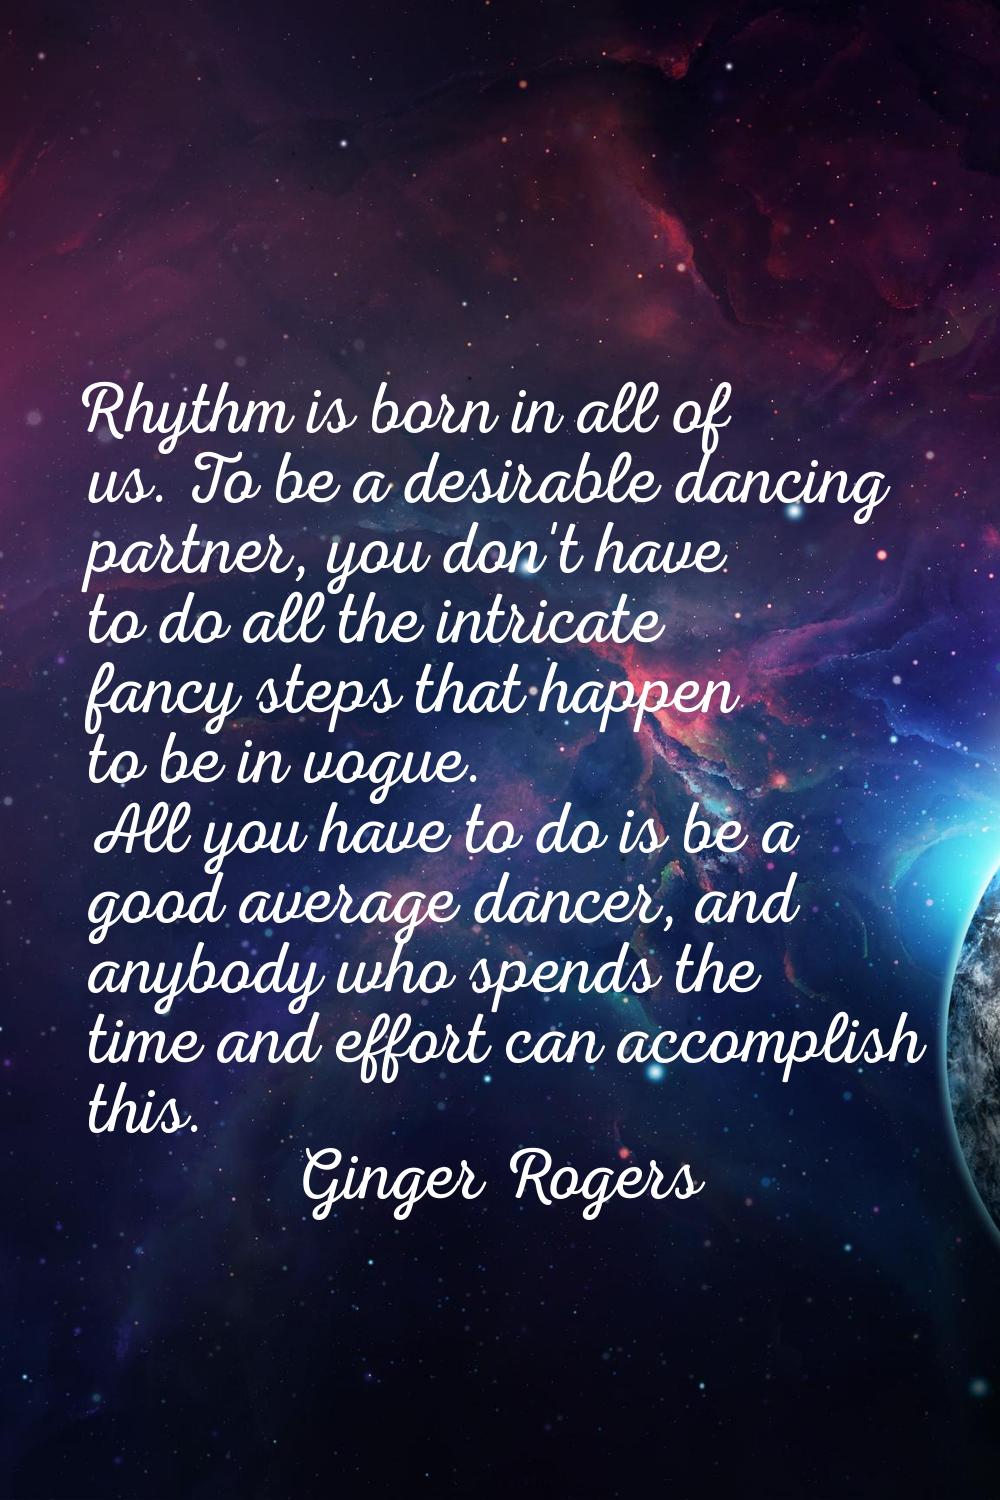 Rhythm is born in all of us. To be a desirable dancing partner, you don't have to do all the intric